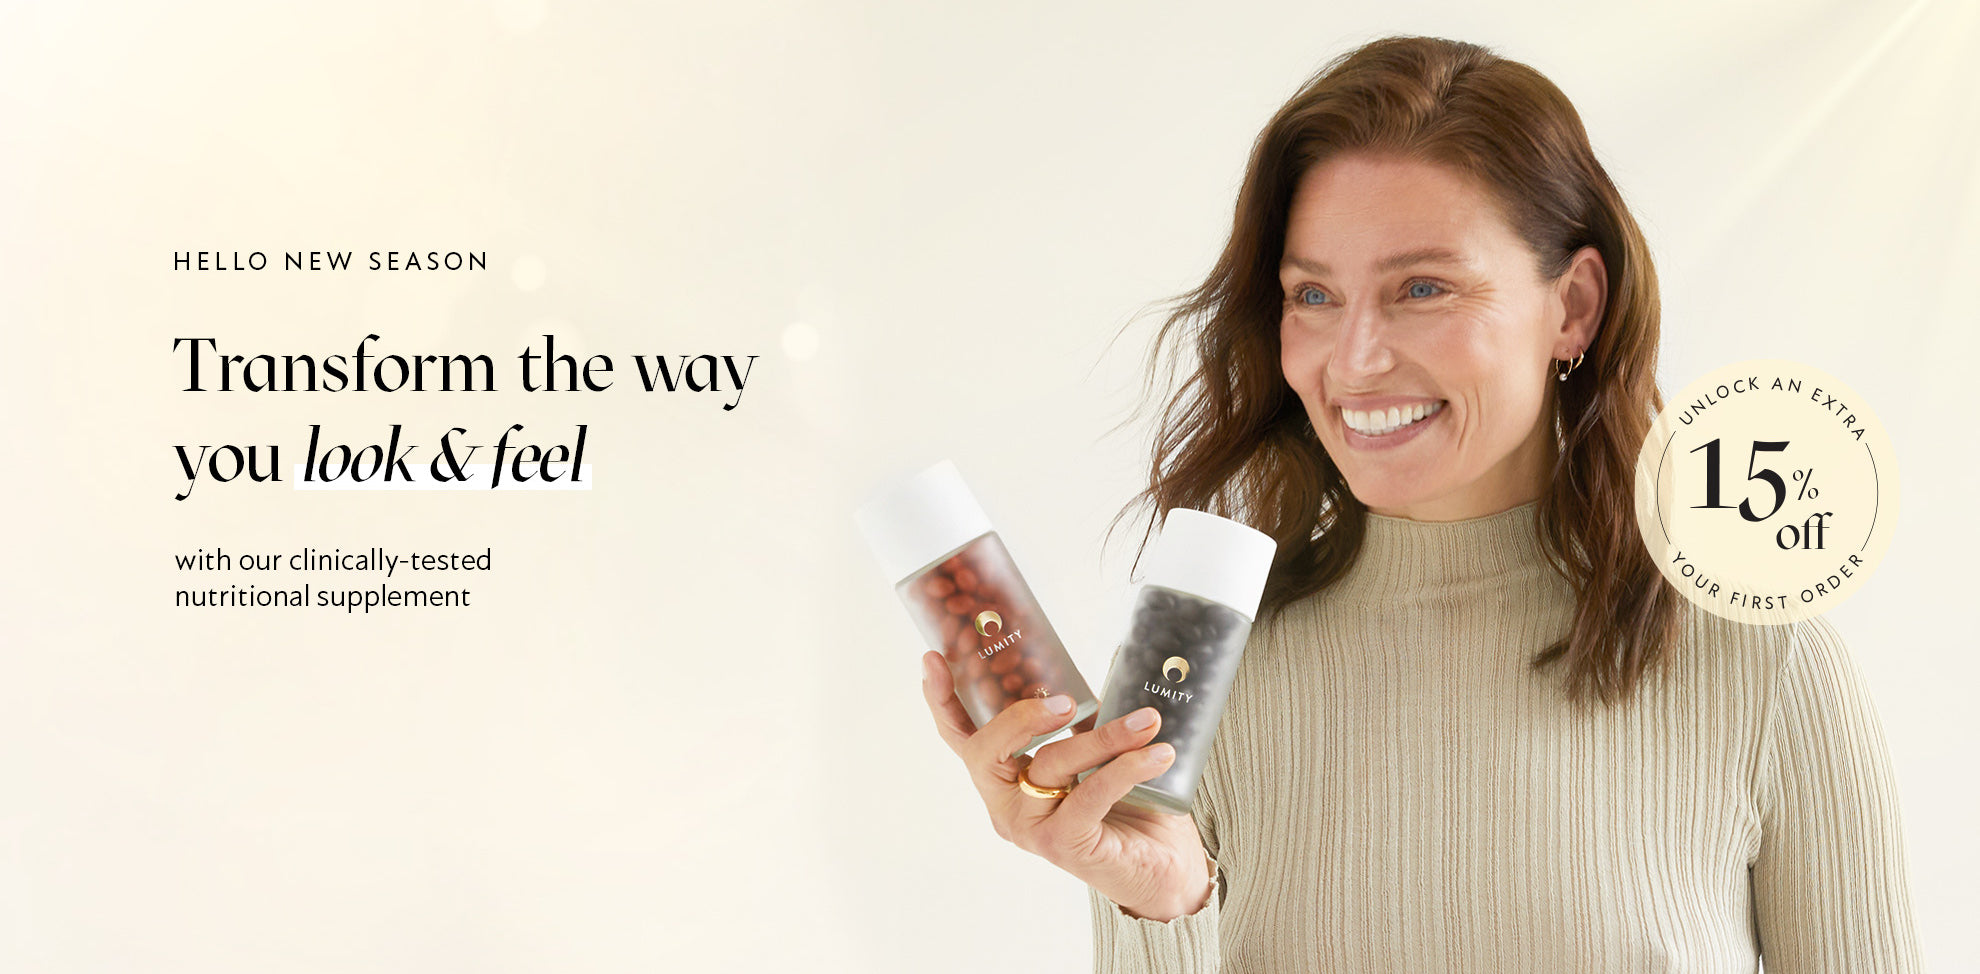 Transform the way you look & feel without clinically-tested supplement. Image of woman holding glass supplement bottles.